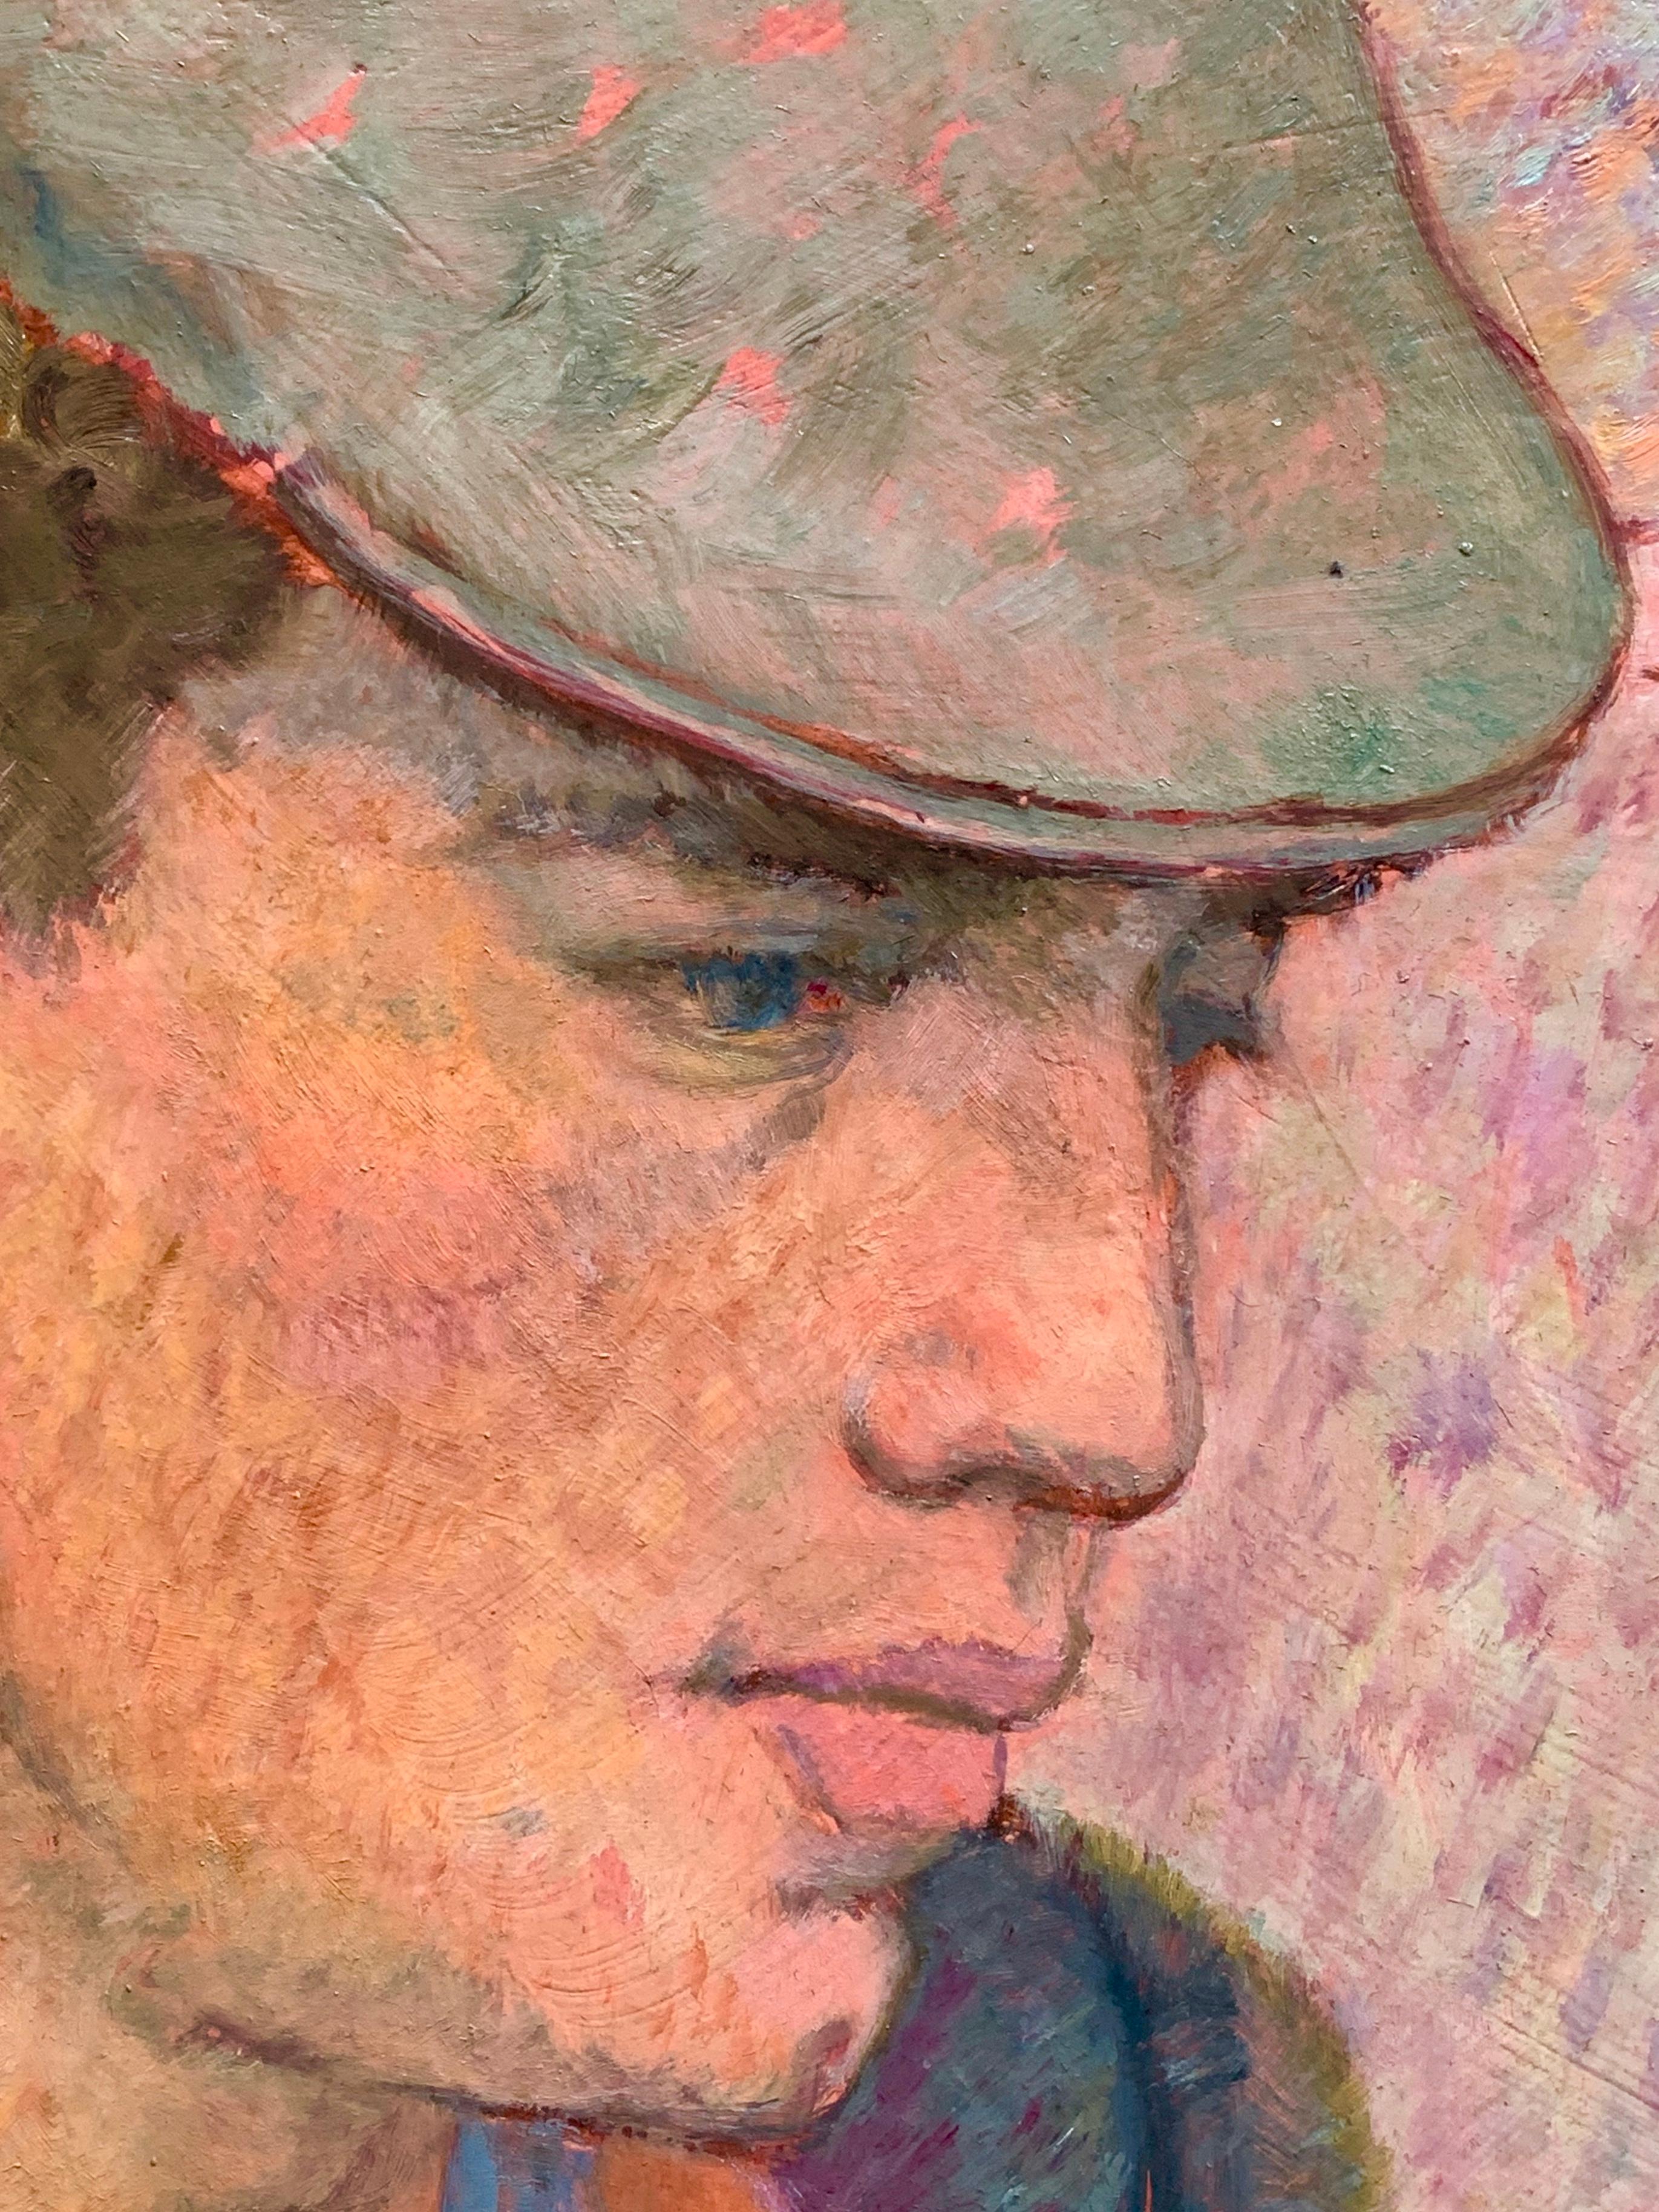 Modern British Portrait of a Handsome Young Gentleman in a Blue Shirt and Hat. - Brown Portrait Painting by Peter Samuelson